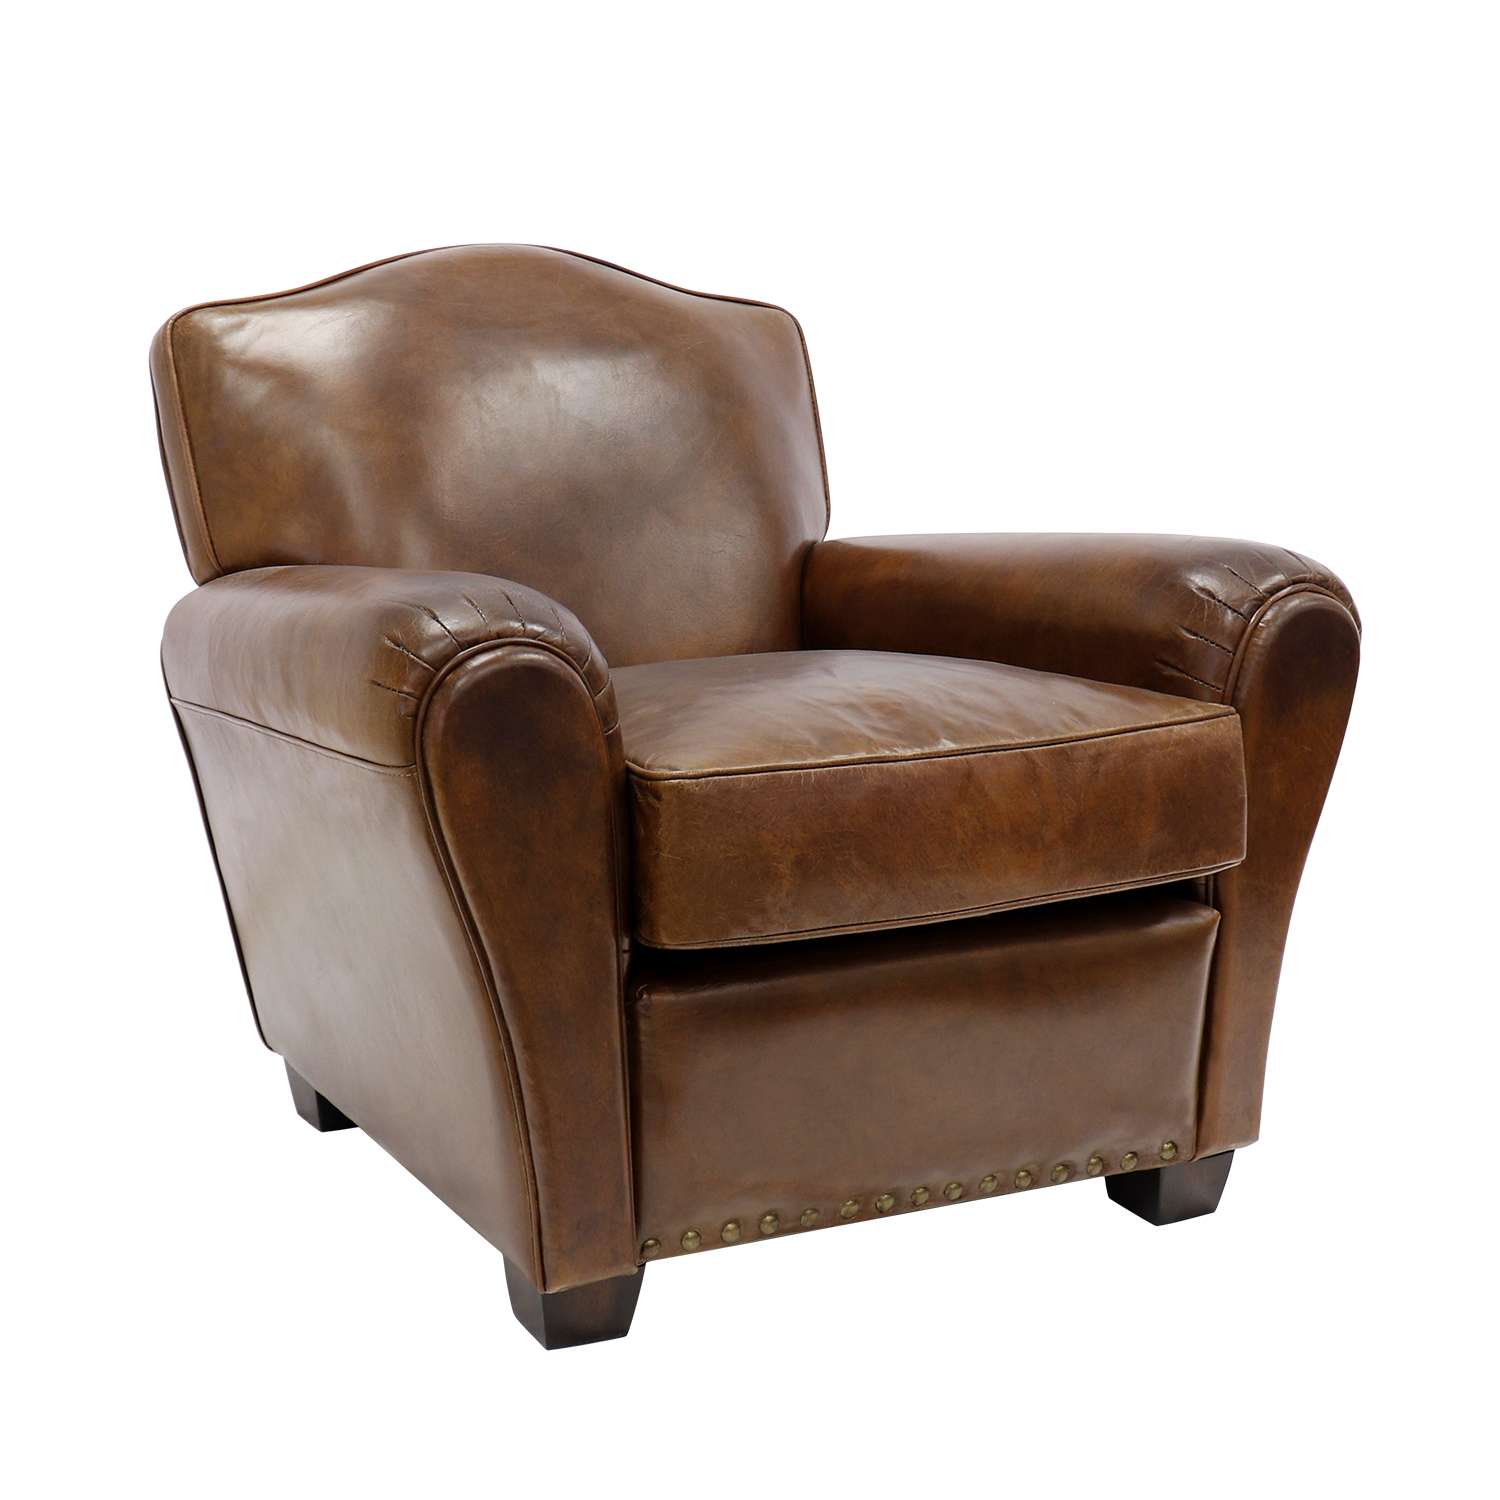 Brown Leather Wingback Chair Classic, Brown Leather Wingback Recliner Chair